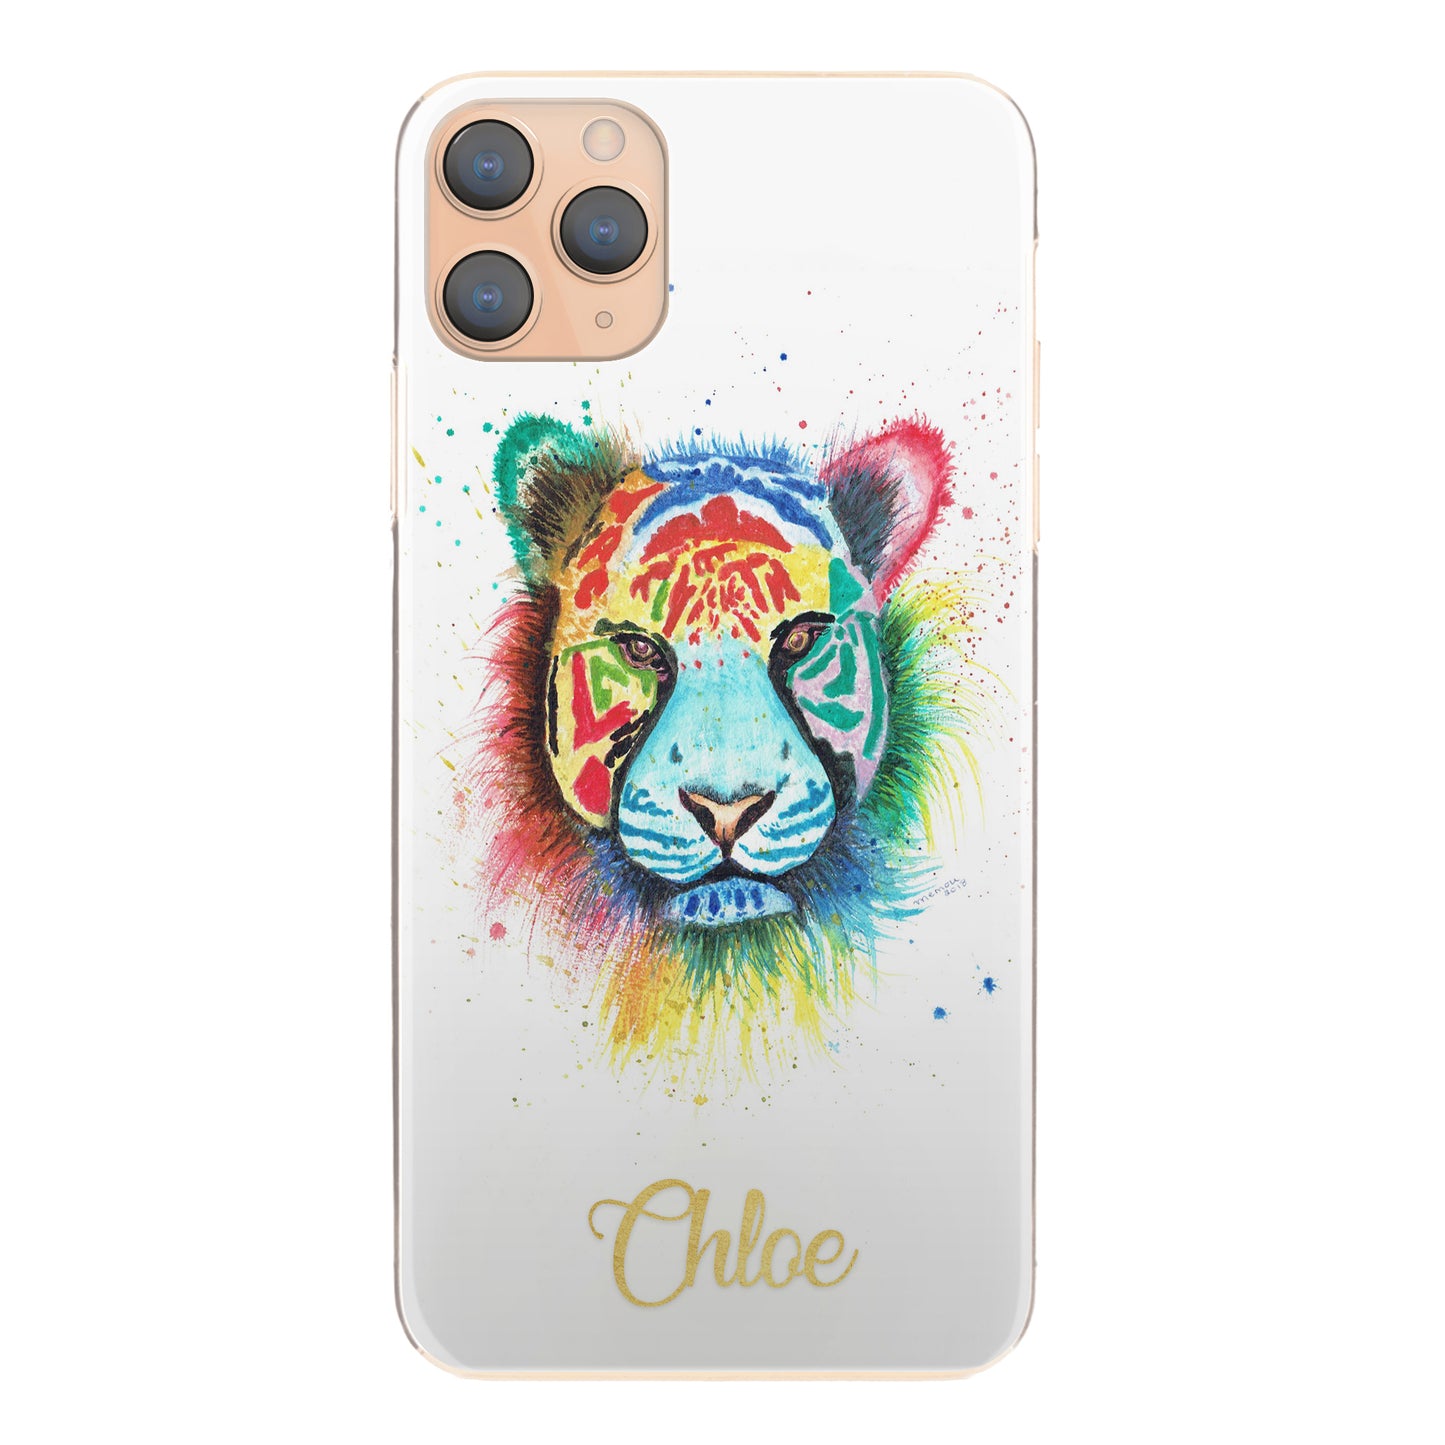 Personalised Huawei Phone Hard Case with Rainbow Tiger and Gold Text